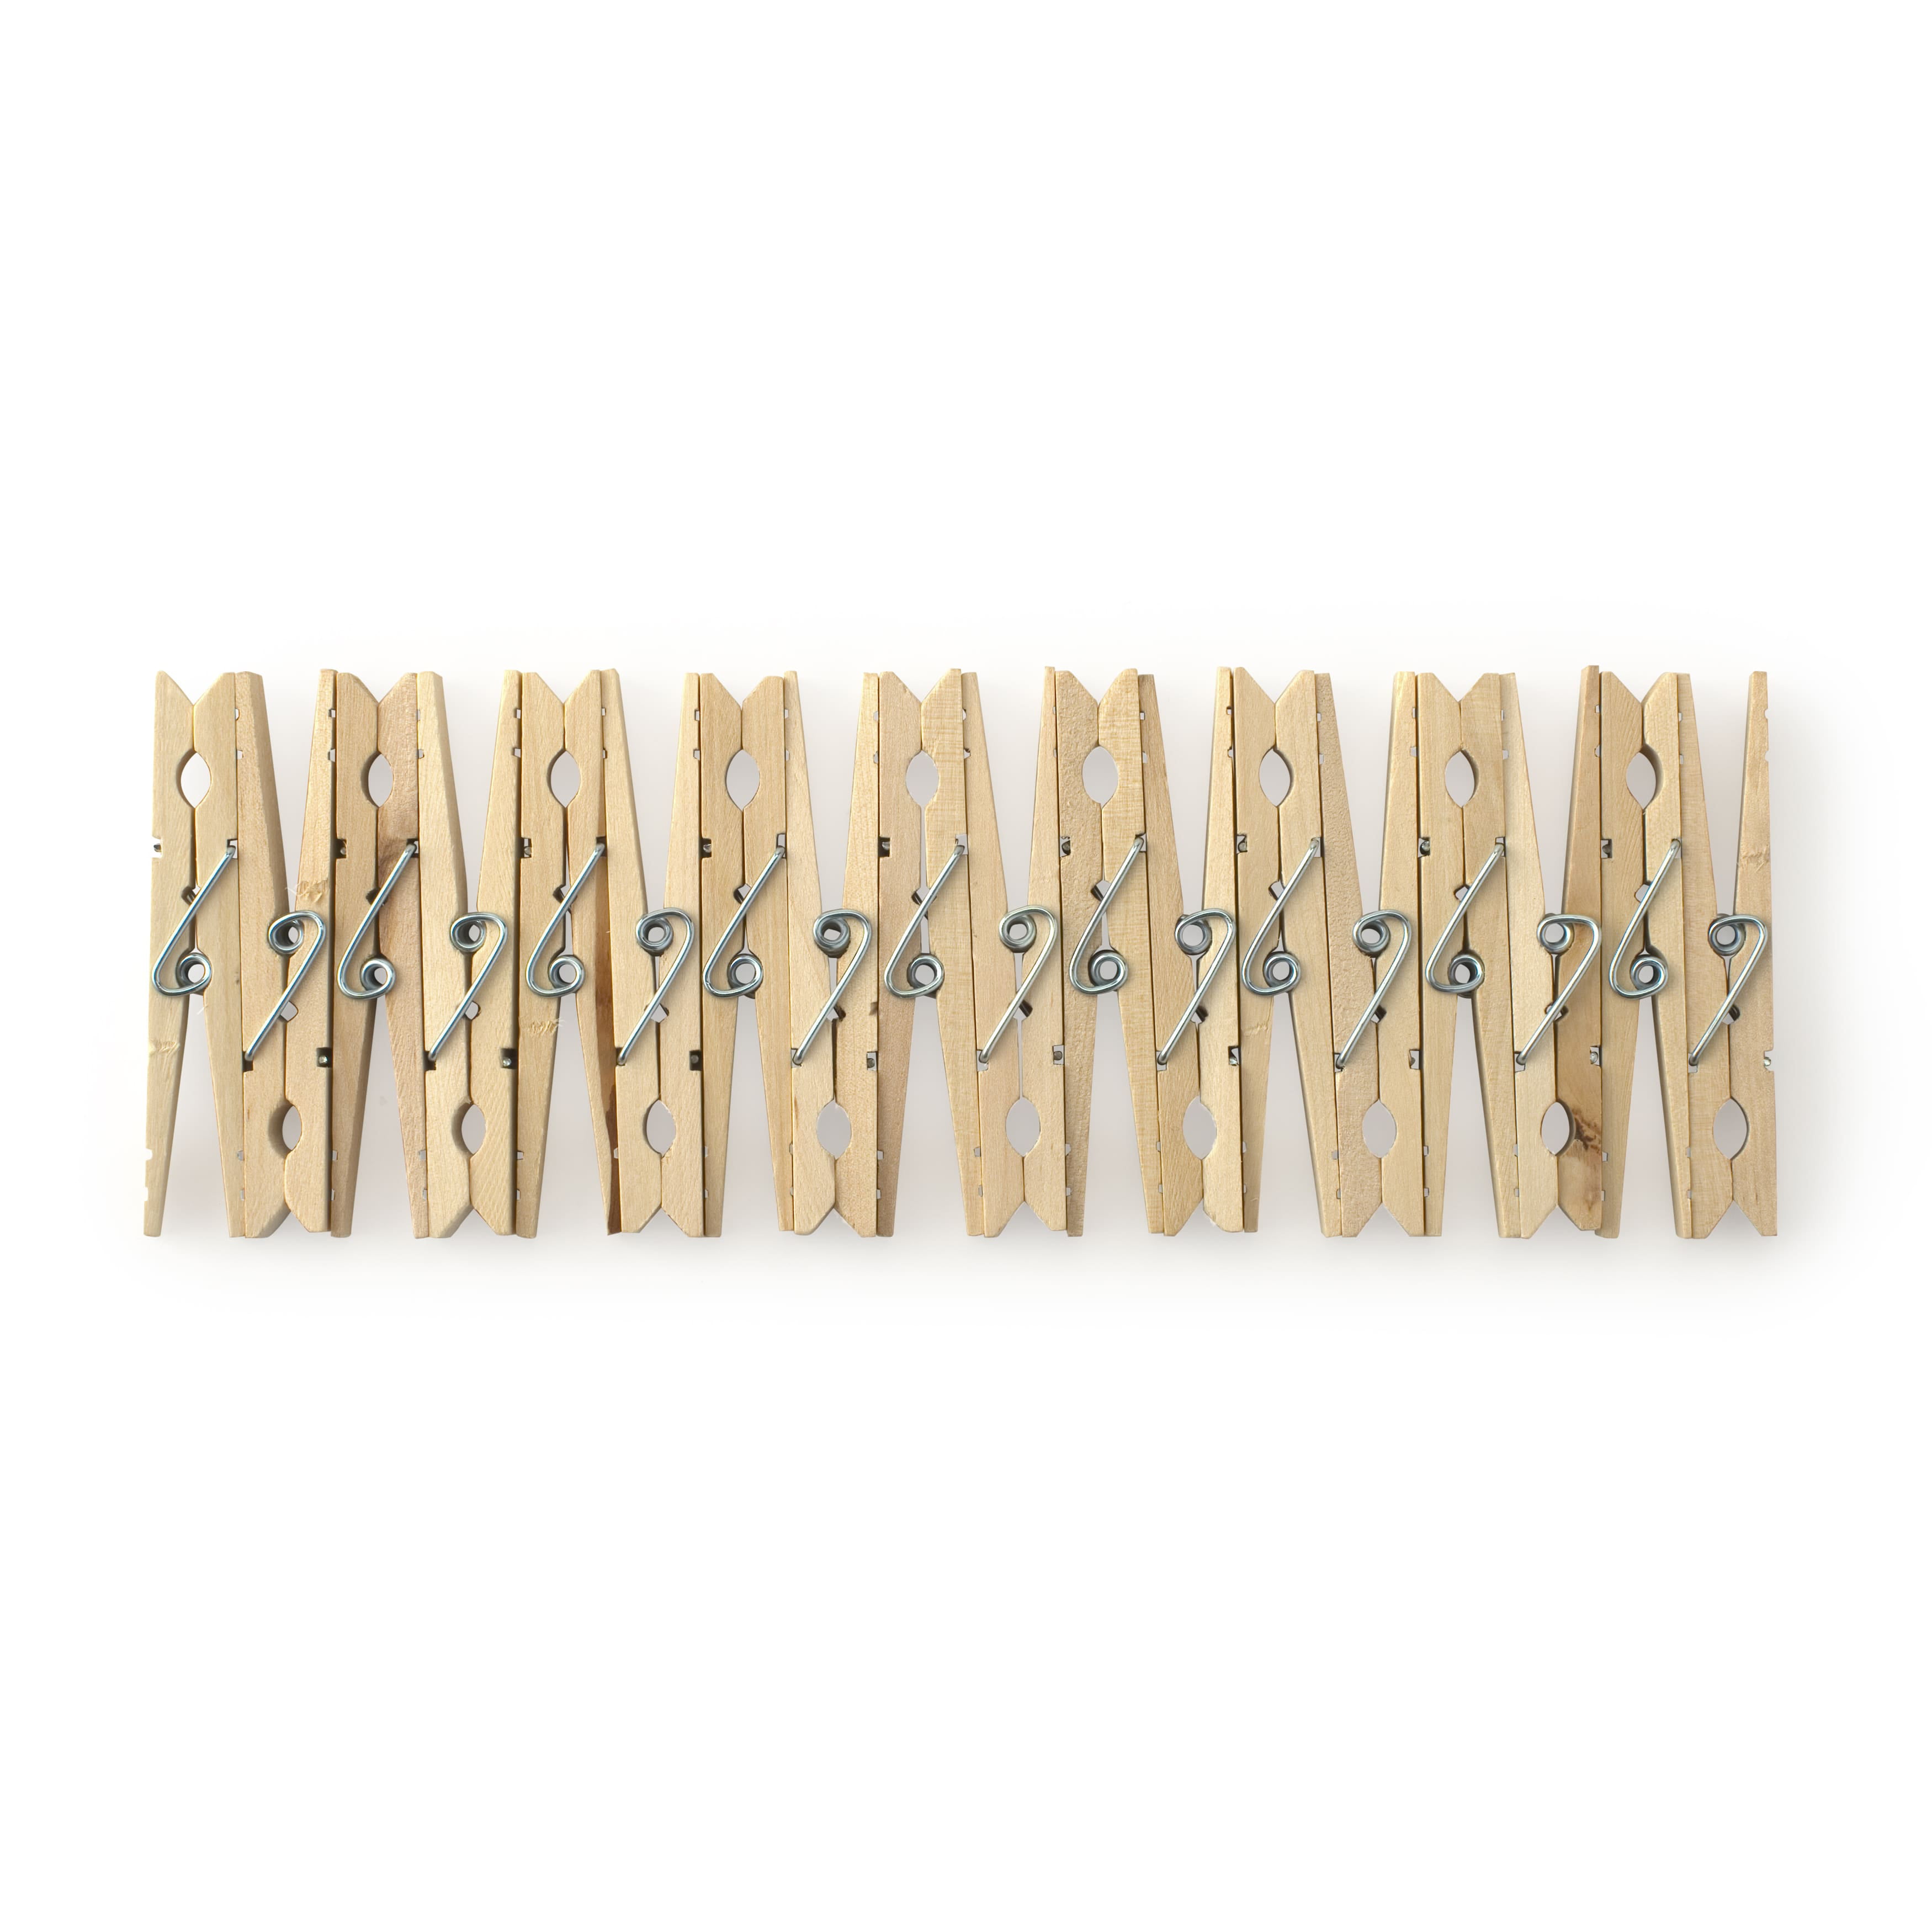 12 Packs: 50 Ct. (600 Total) Tiny Wood Clothespins by Creatology, Boy's, Beige